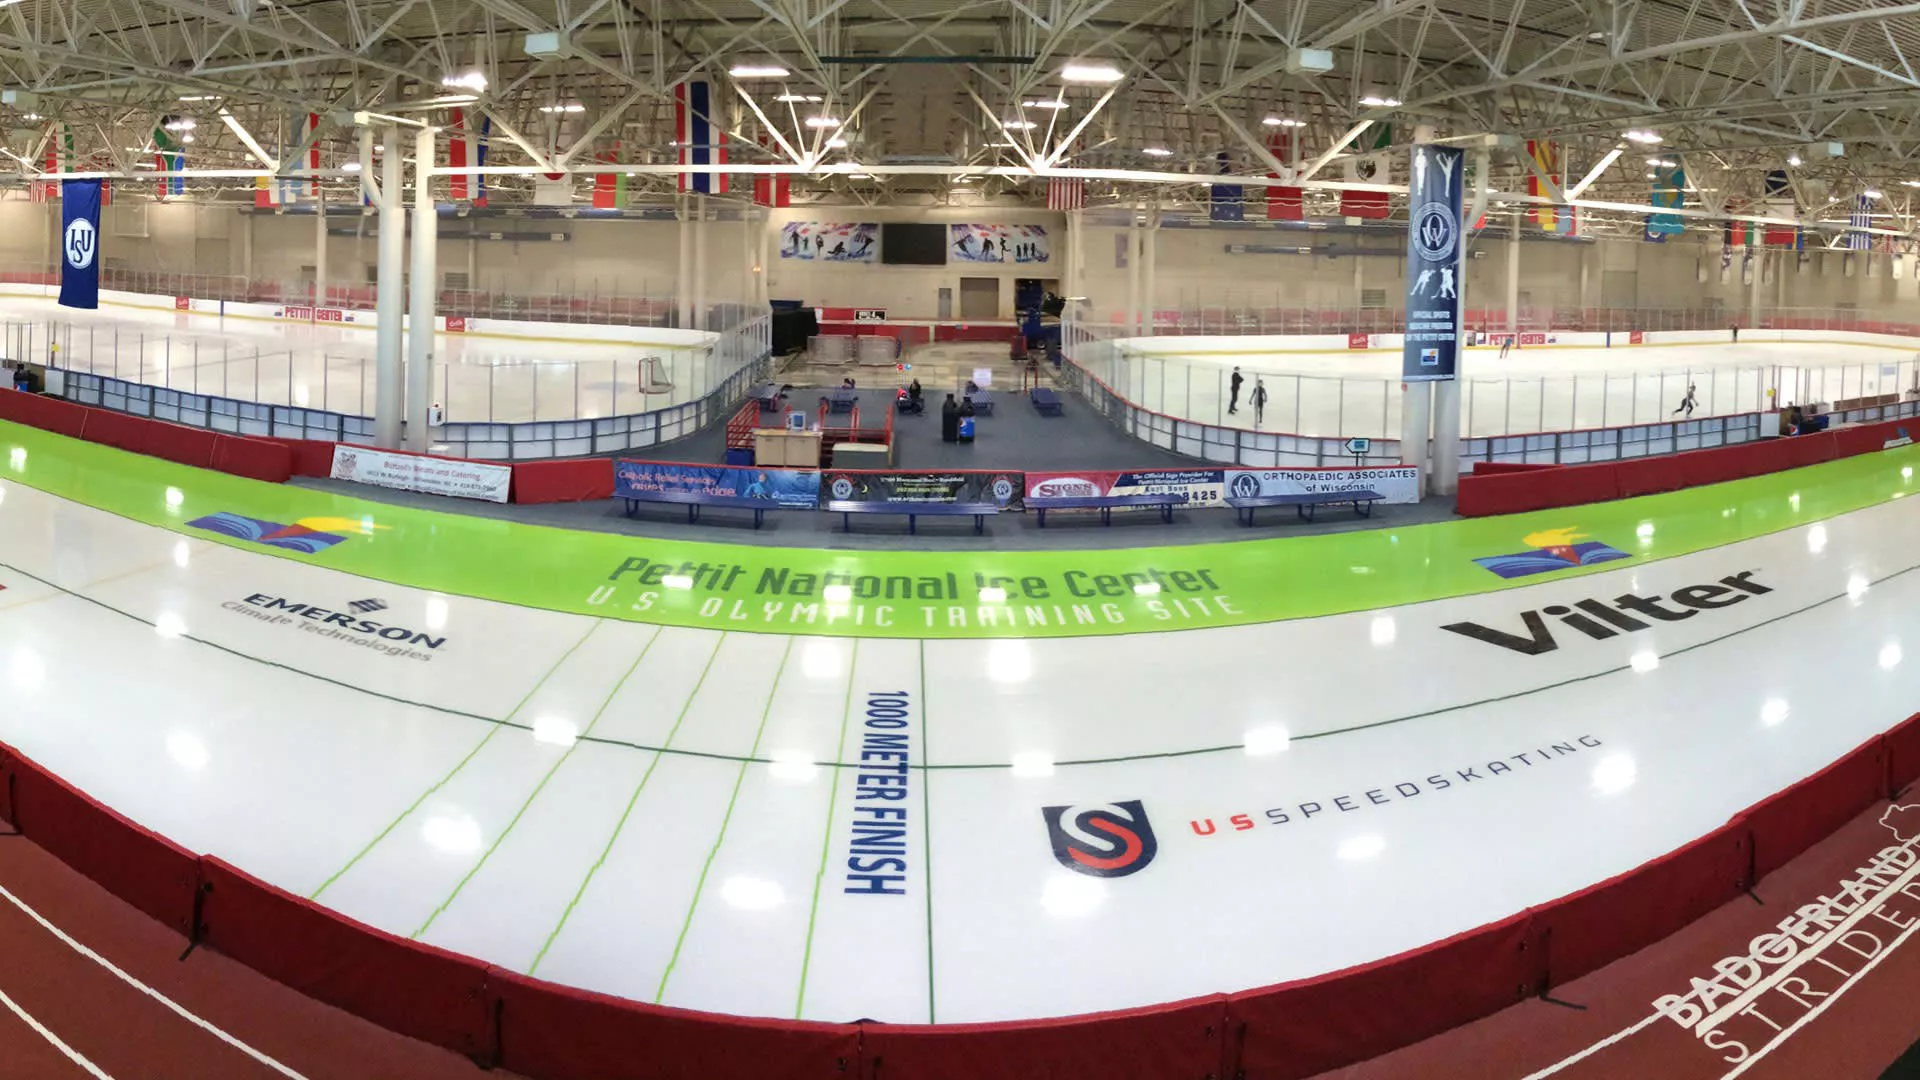 Pettit National Ice Center in USA, North America | Skating - Rated 4.2